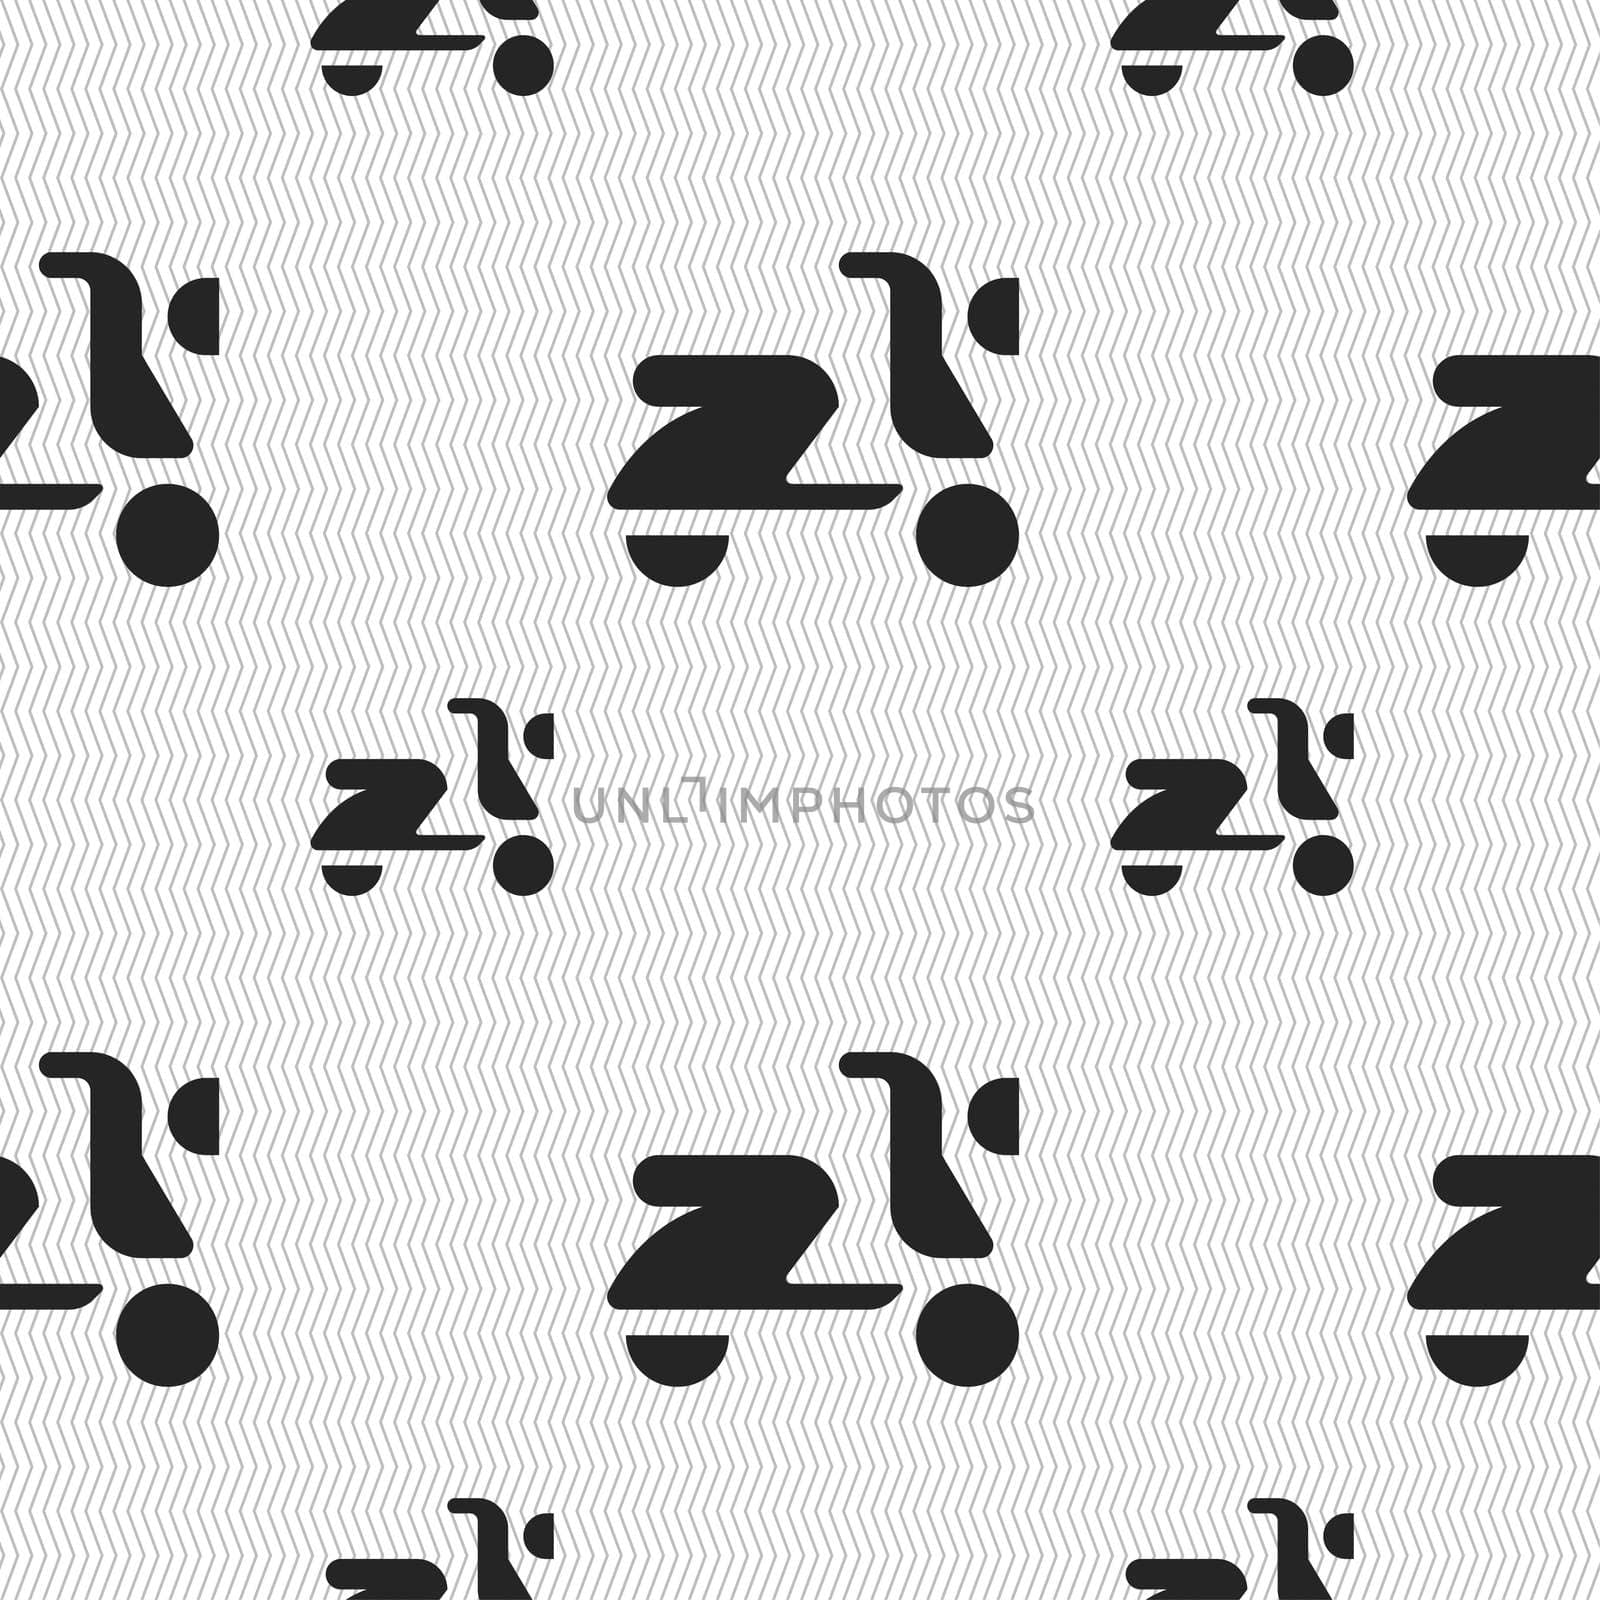 Scooter, bike icon sign. Seamless pattern with geometric texture. illustration